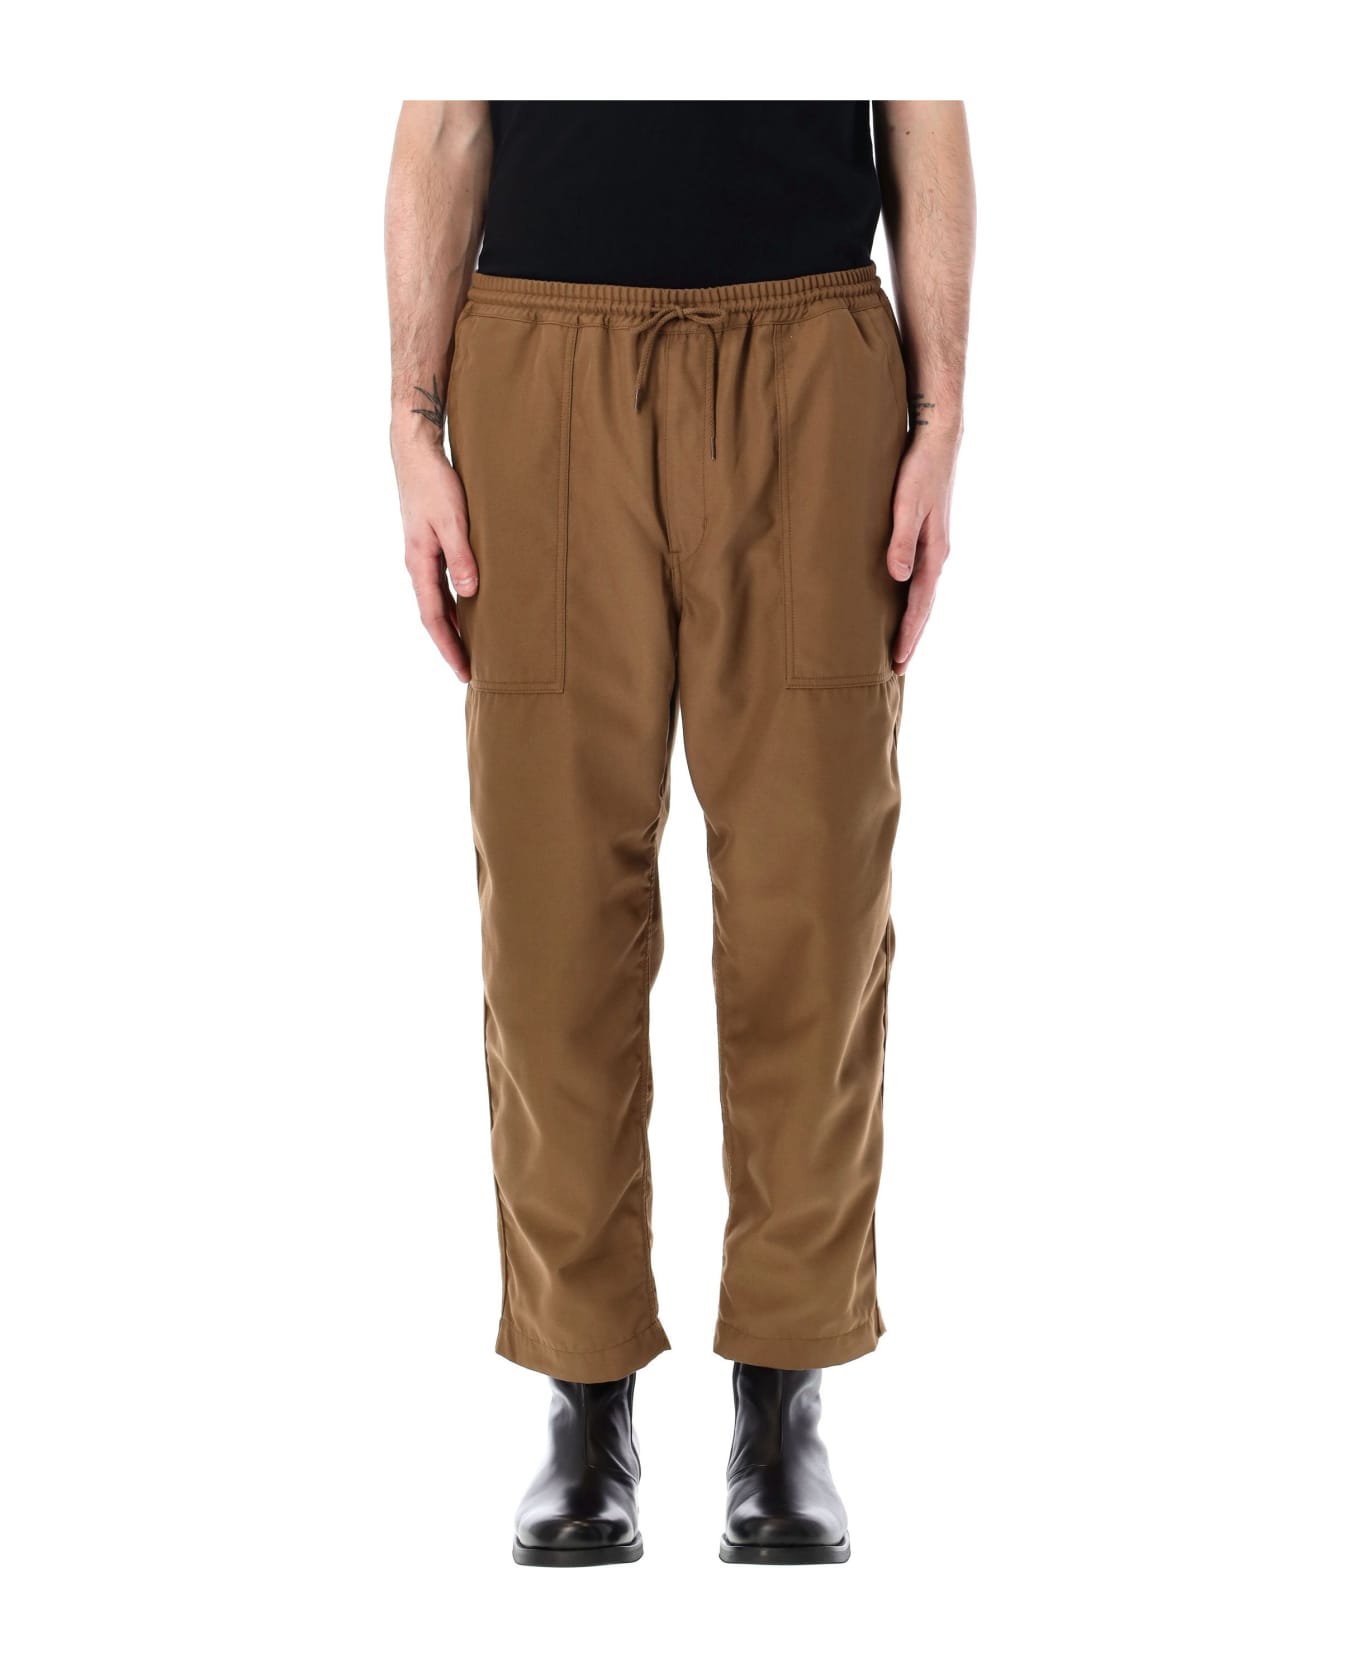 Comme des Garçons Homme Elasticated Waistband Chino Pants - BROWN